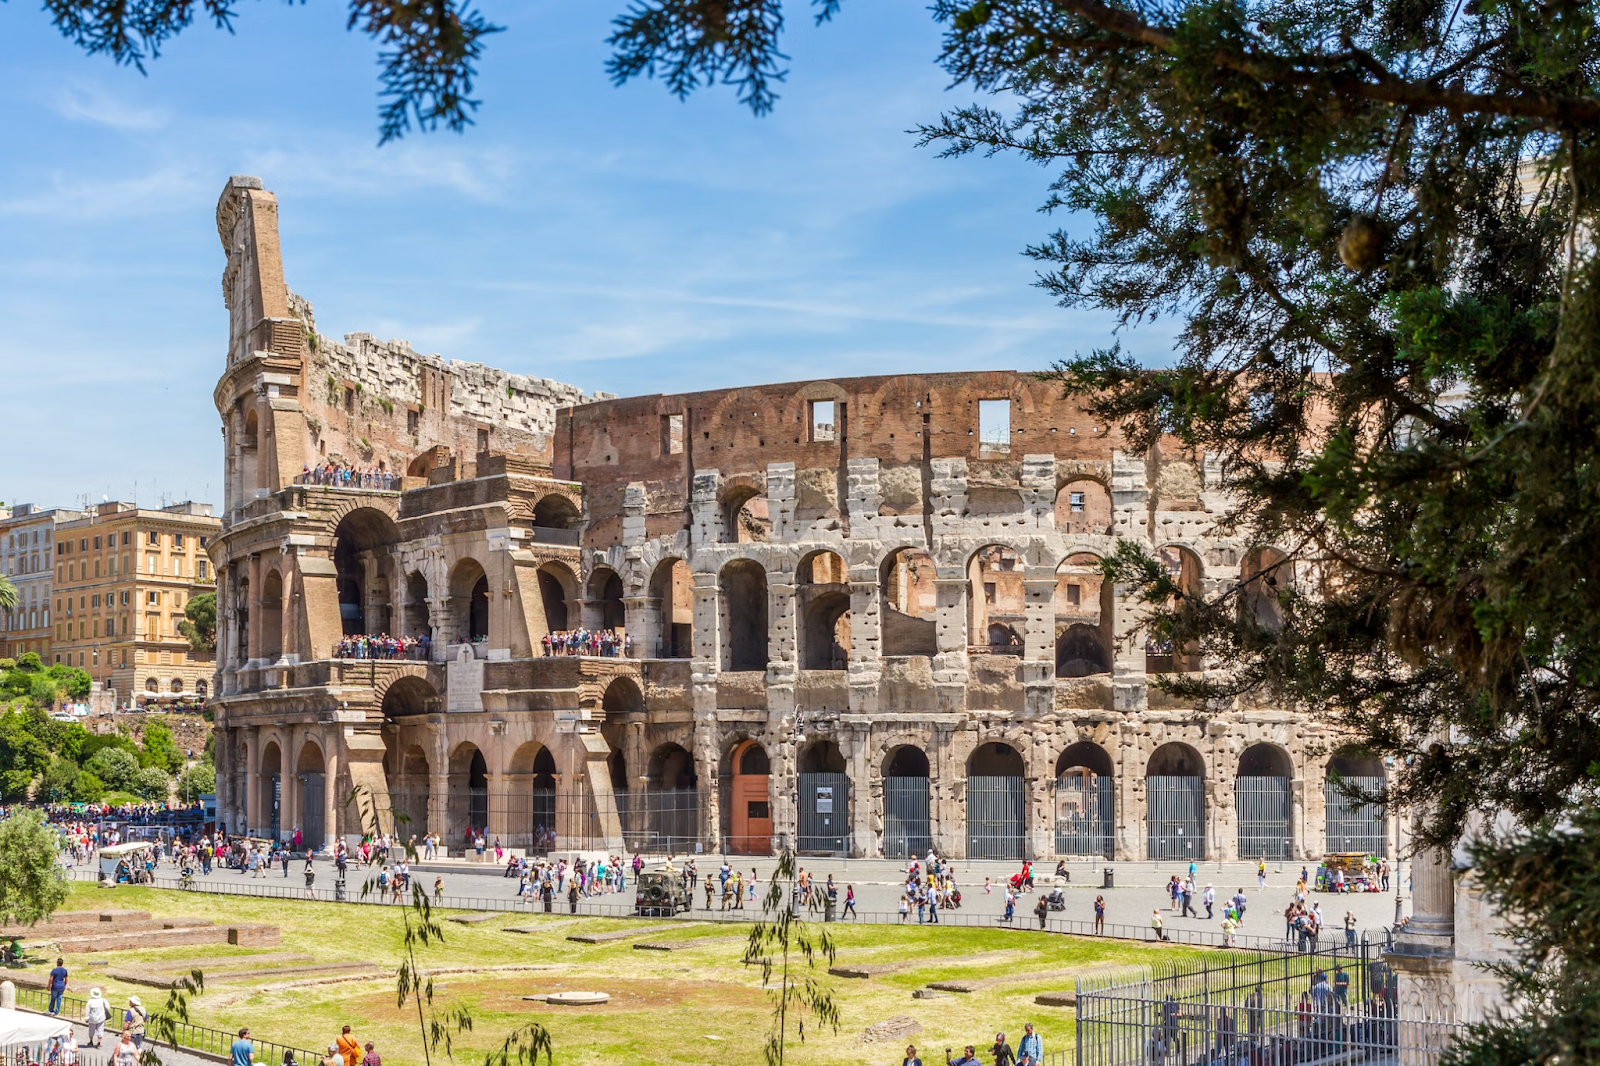 Practical Tips for Visiting the Colosseum